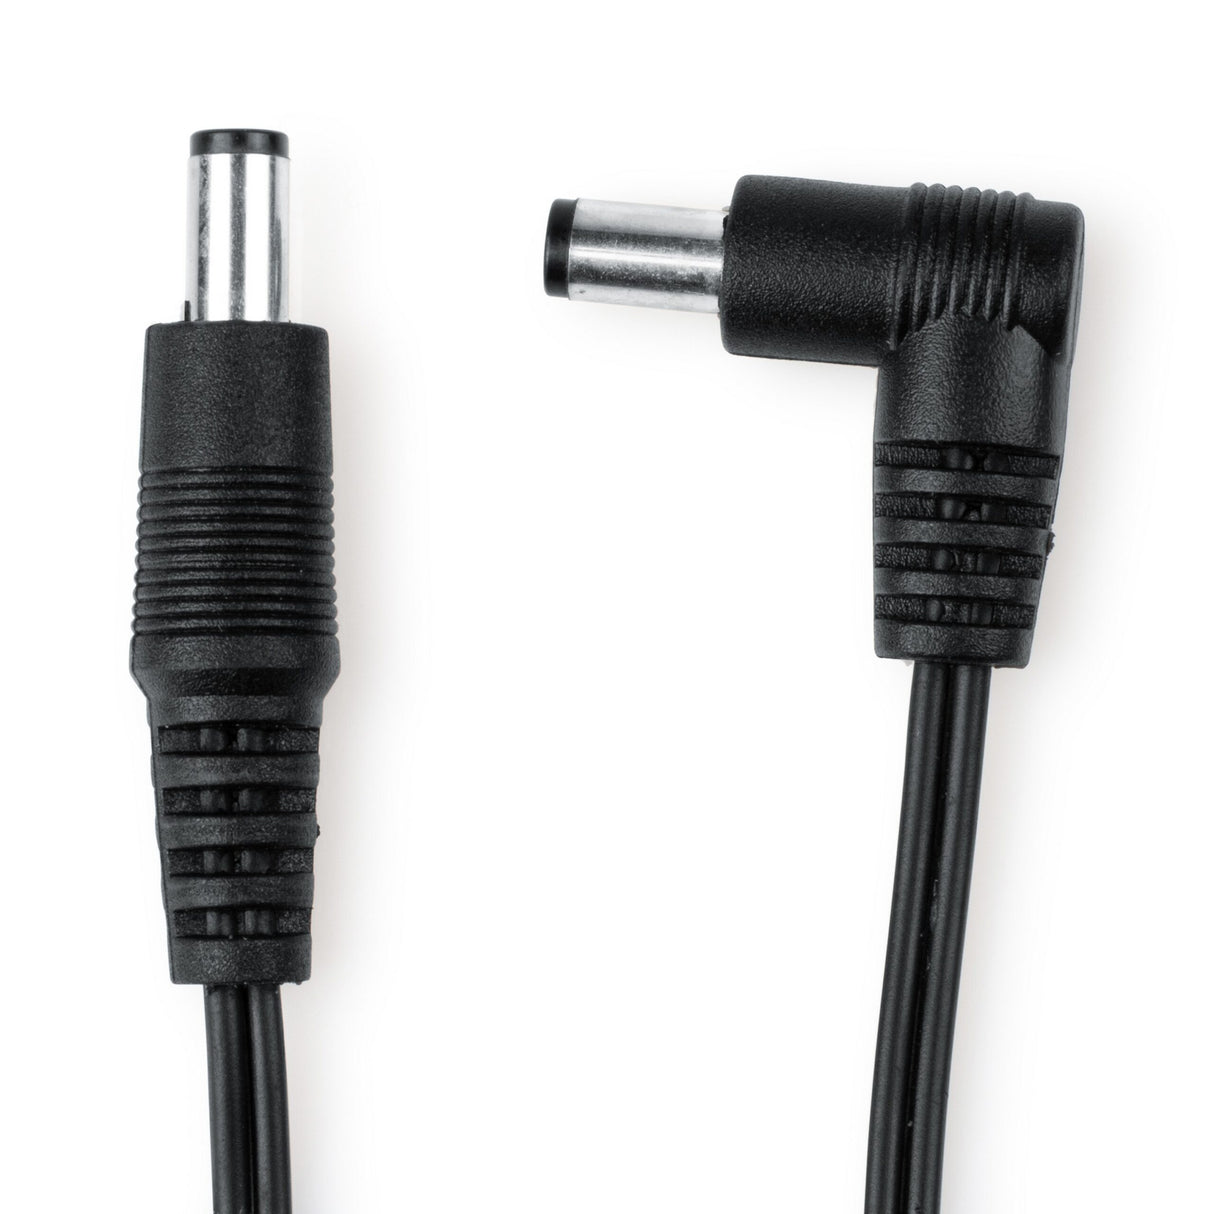 Gator GTR-PWR-DCP20 Single DC Power Cable for Pedals, 20 Inch